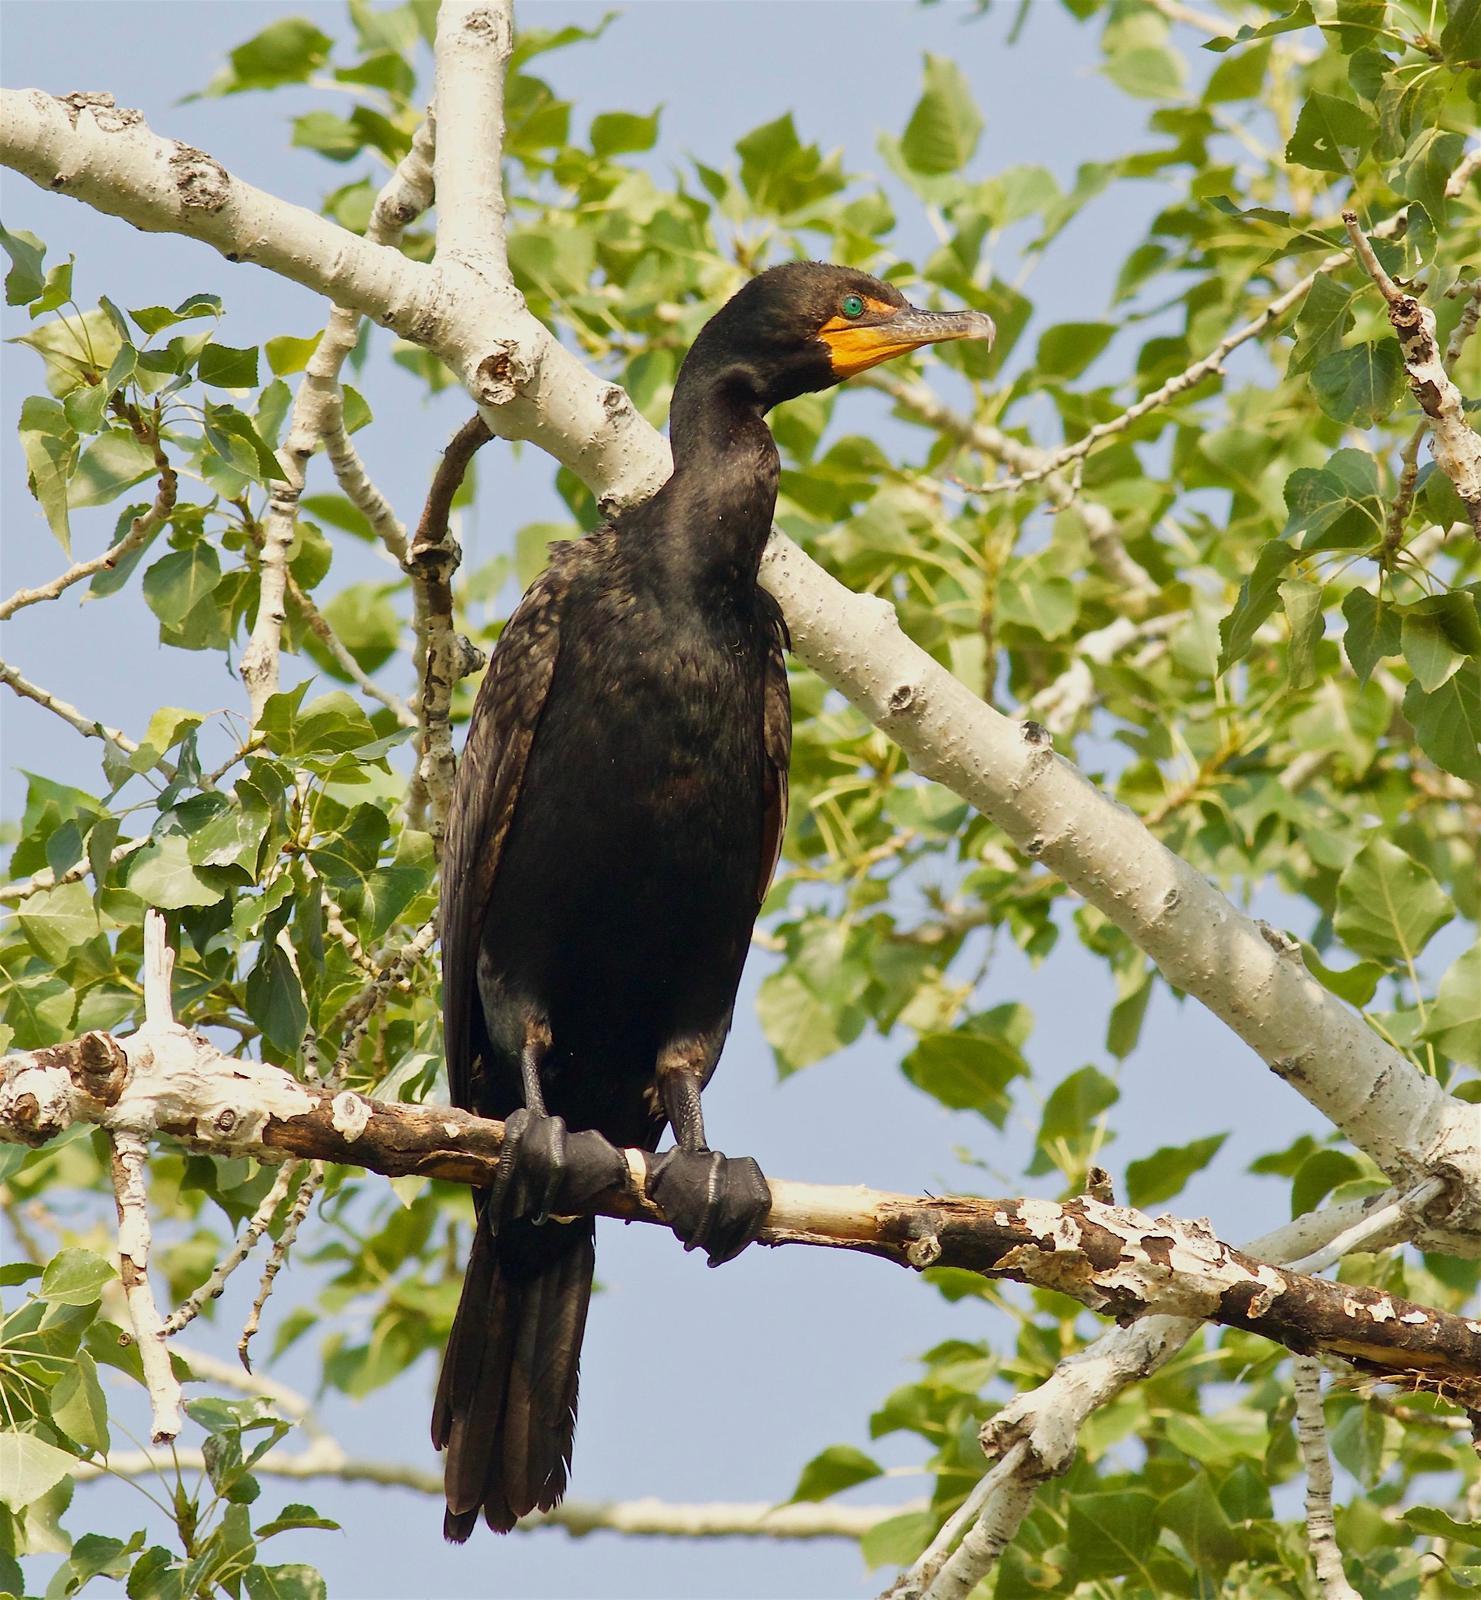 Double-crested Cormorant Photo by Kathryn Keith